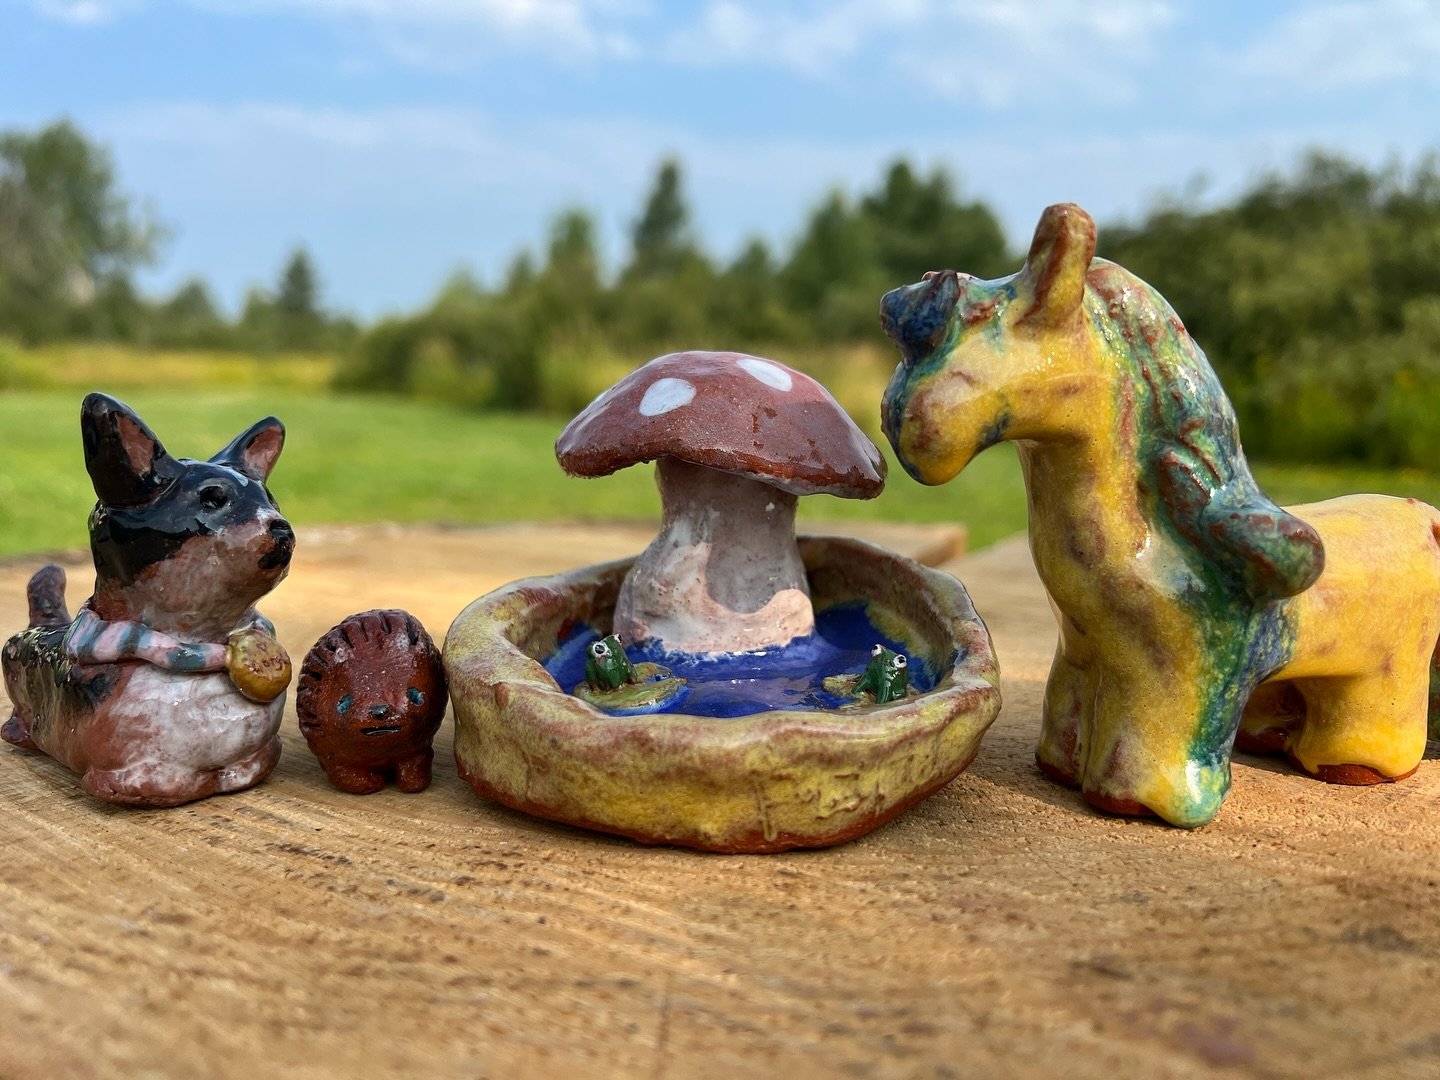 A few of our faves from Day In Clay last summer. We prepare the local clay for the public to make pottery in a free, one day workshop, every year! Last summer was our 10th annual arts event! 💚🏕️🧱